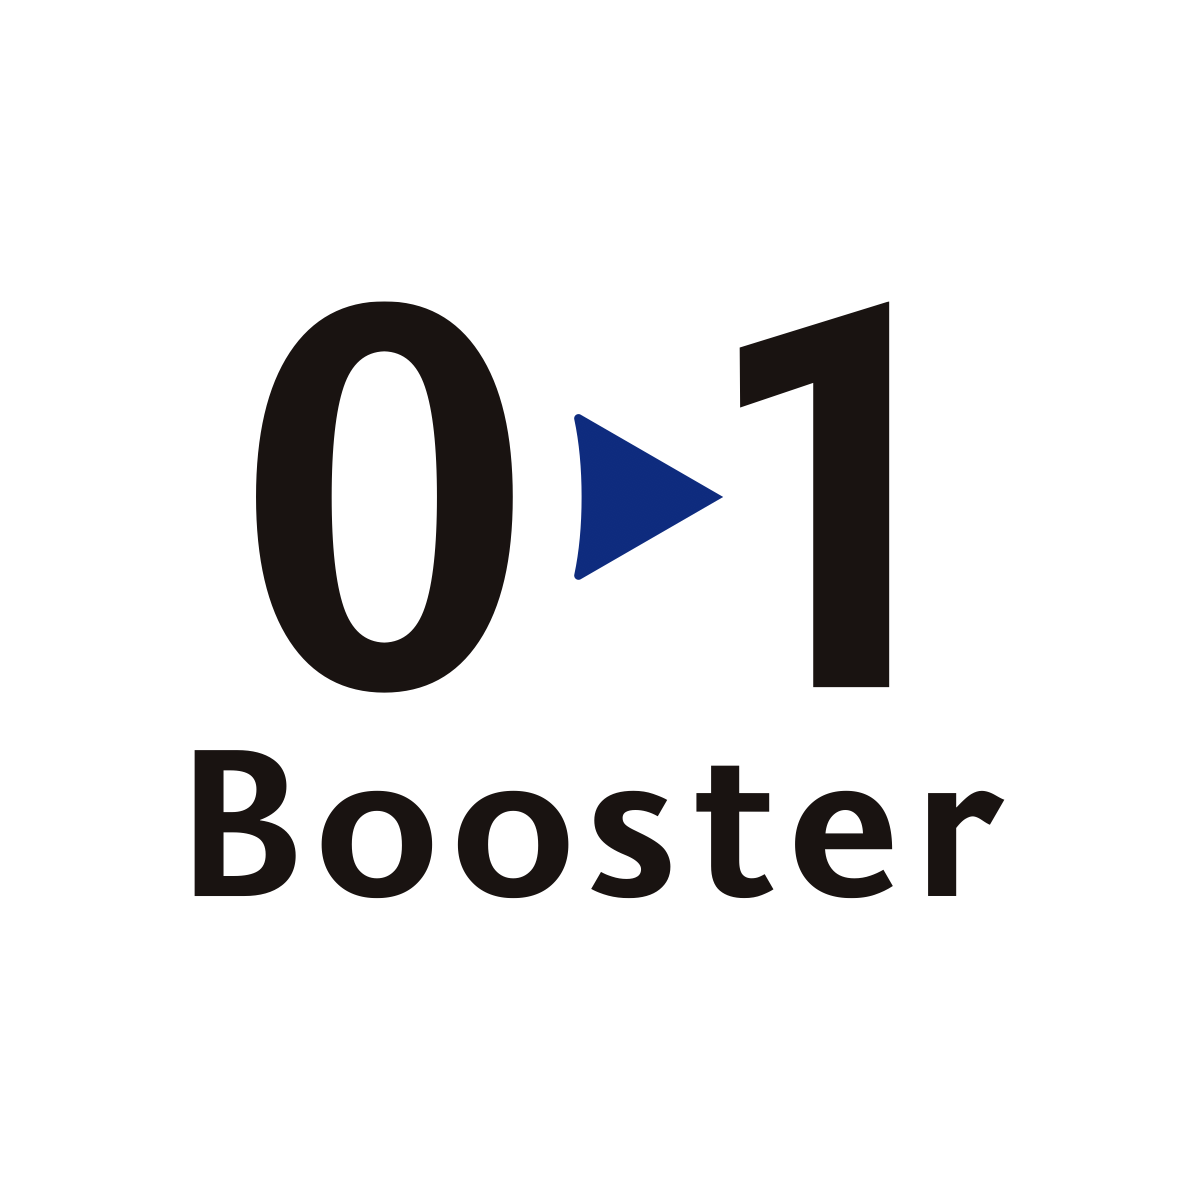 01 Booster